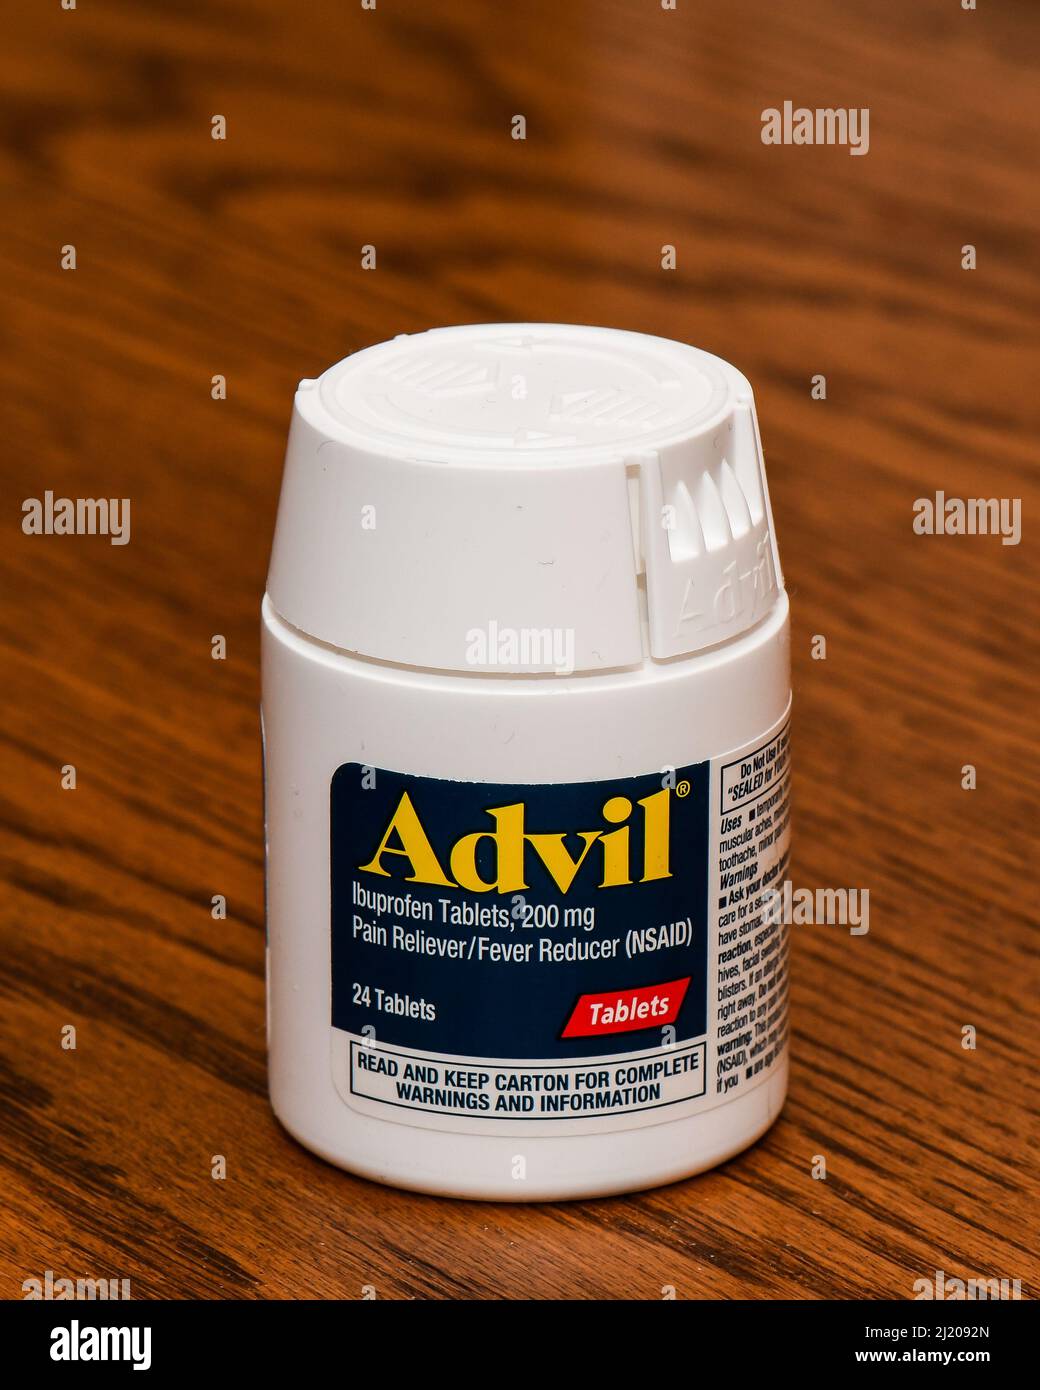 A white plastic bottle of 24 coated tablets of Advil, 200 mg Ibuprofen, a pain reliever and fever reducer NSAID isolated on an oak desk Stock Photo